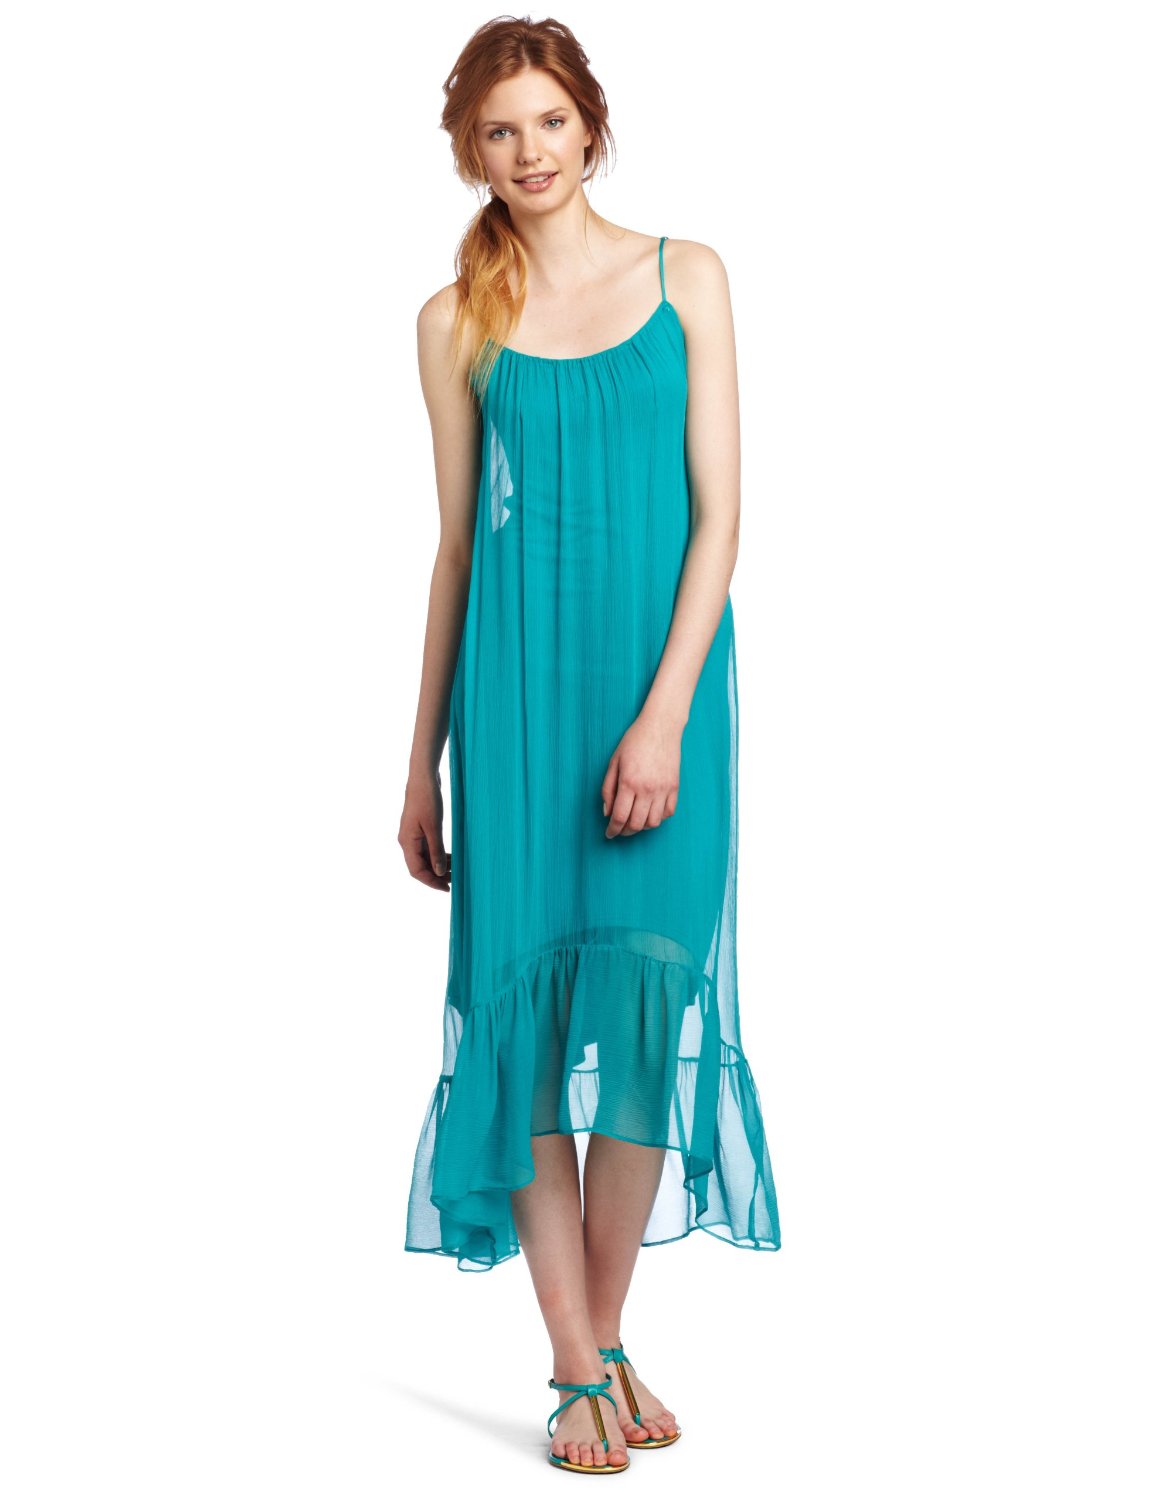 Aqua High Low Cascade Dress from Twelfth St. by Cynthia Vincent